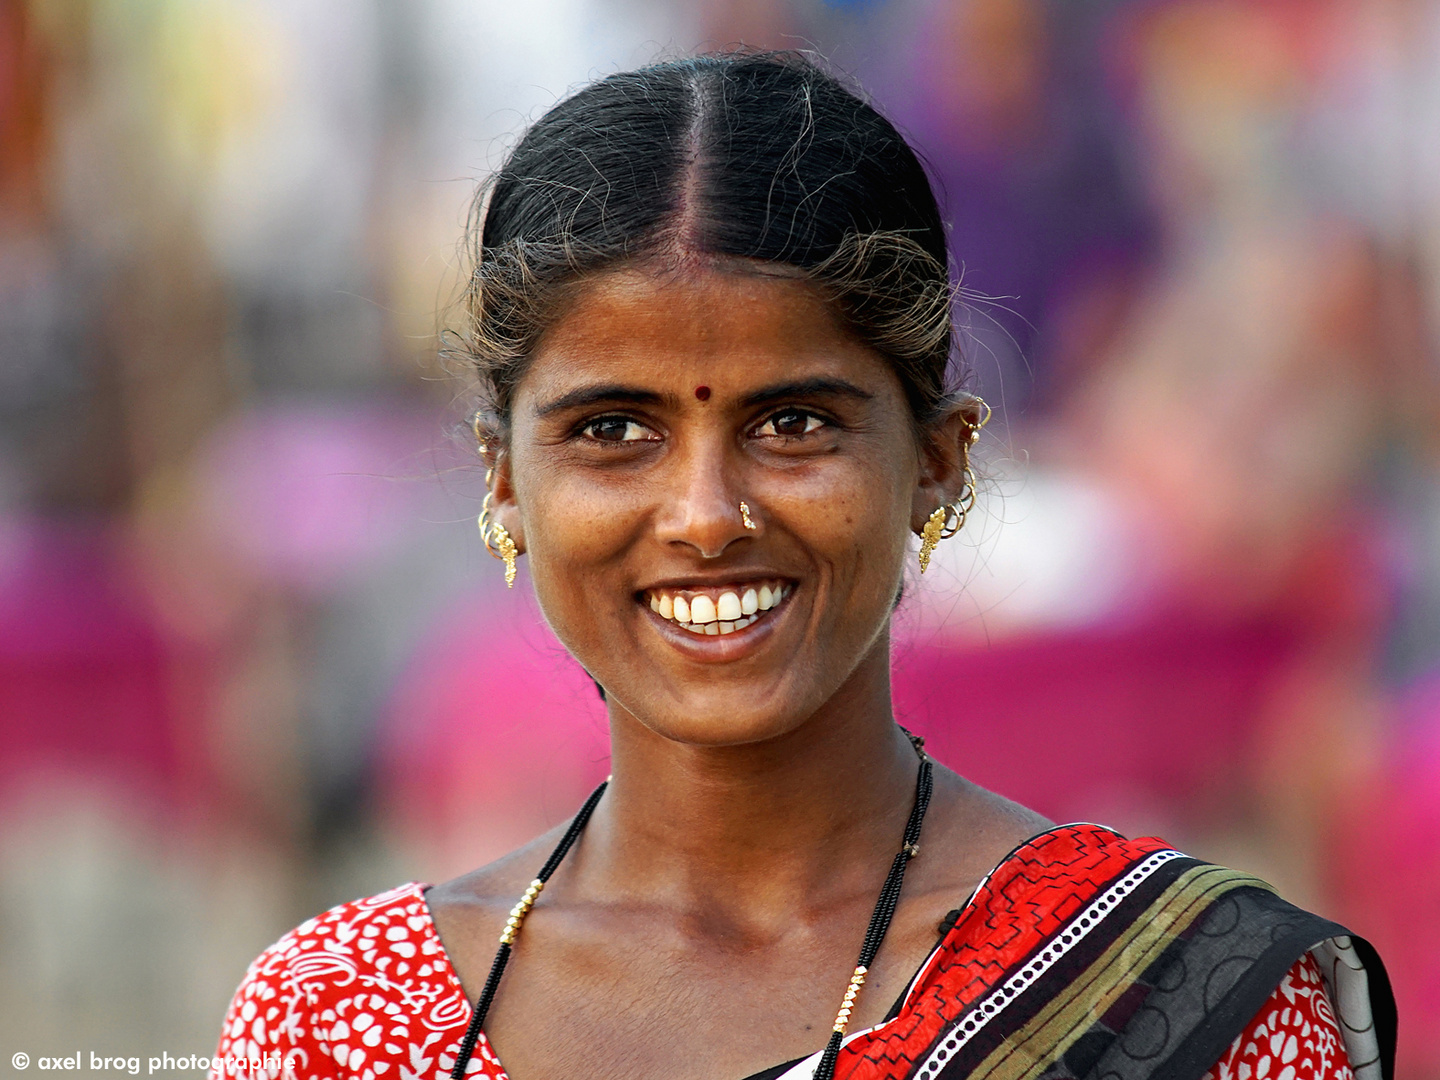 Portrait of India 1 by Axel Brog